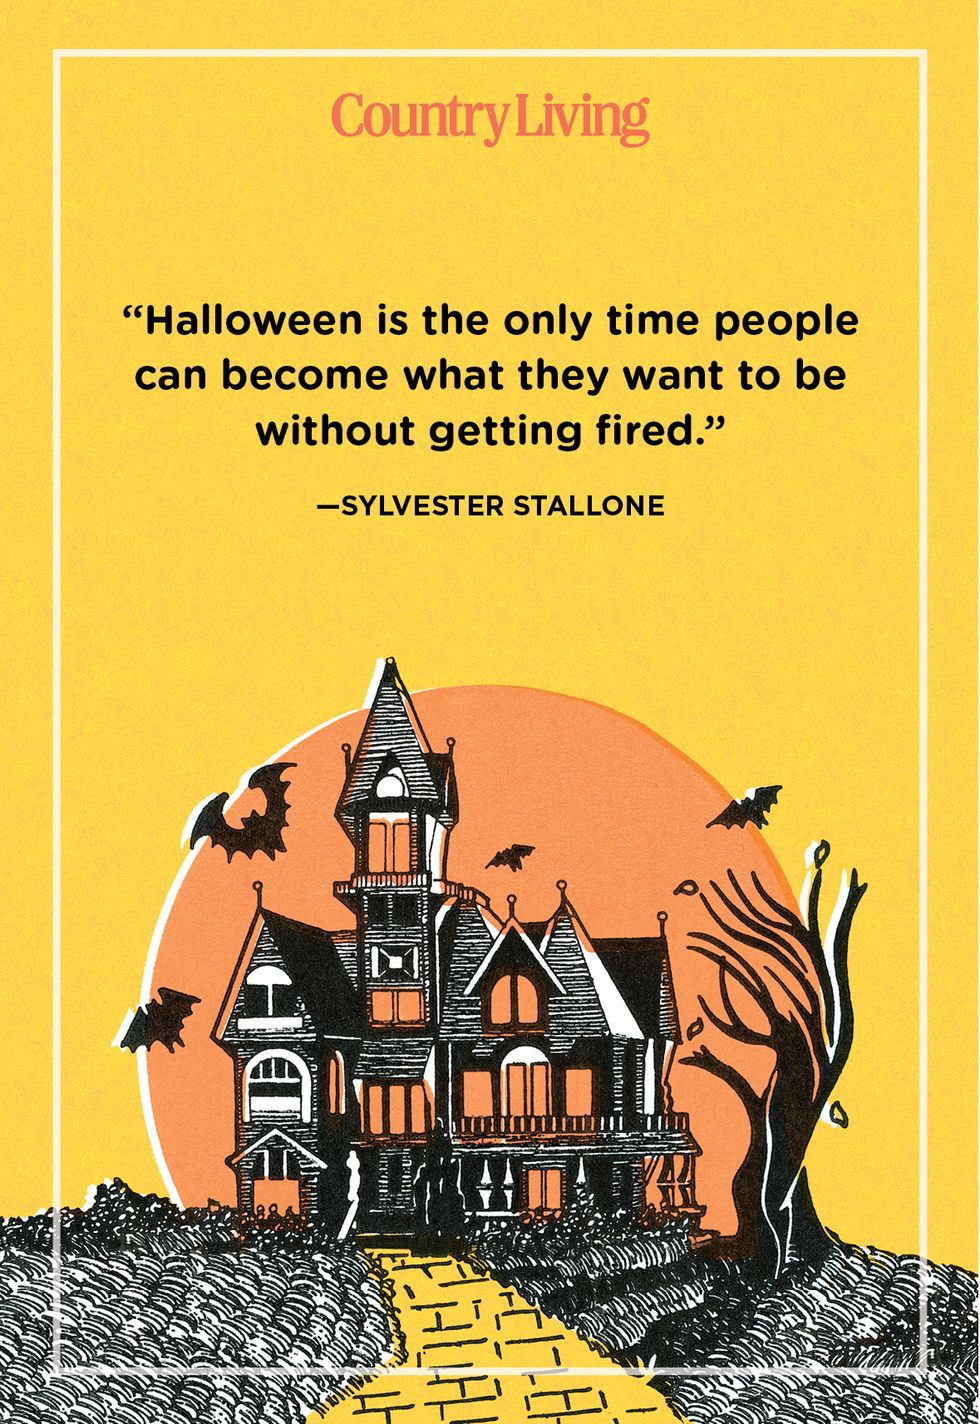 famous halloween quote by sylvester stallone